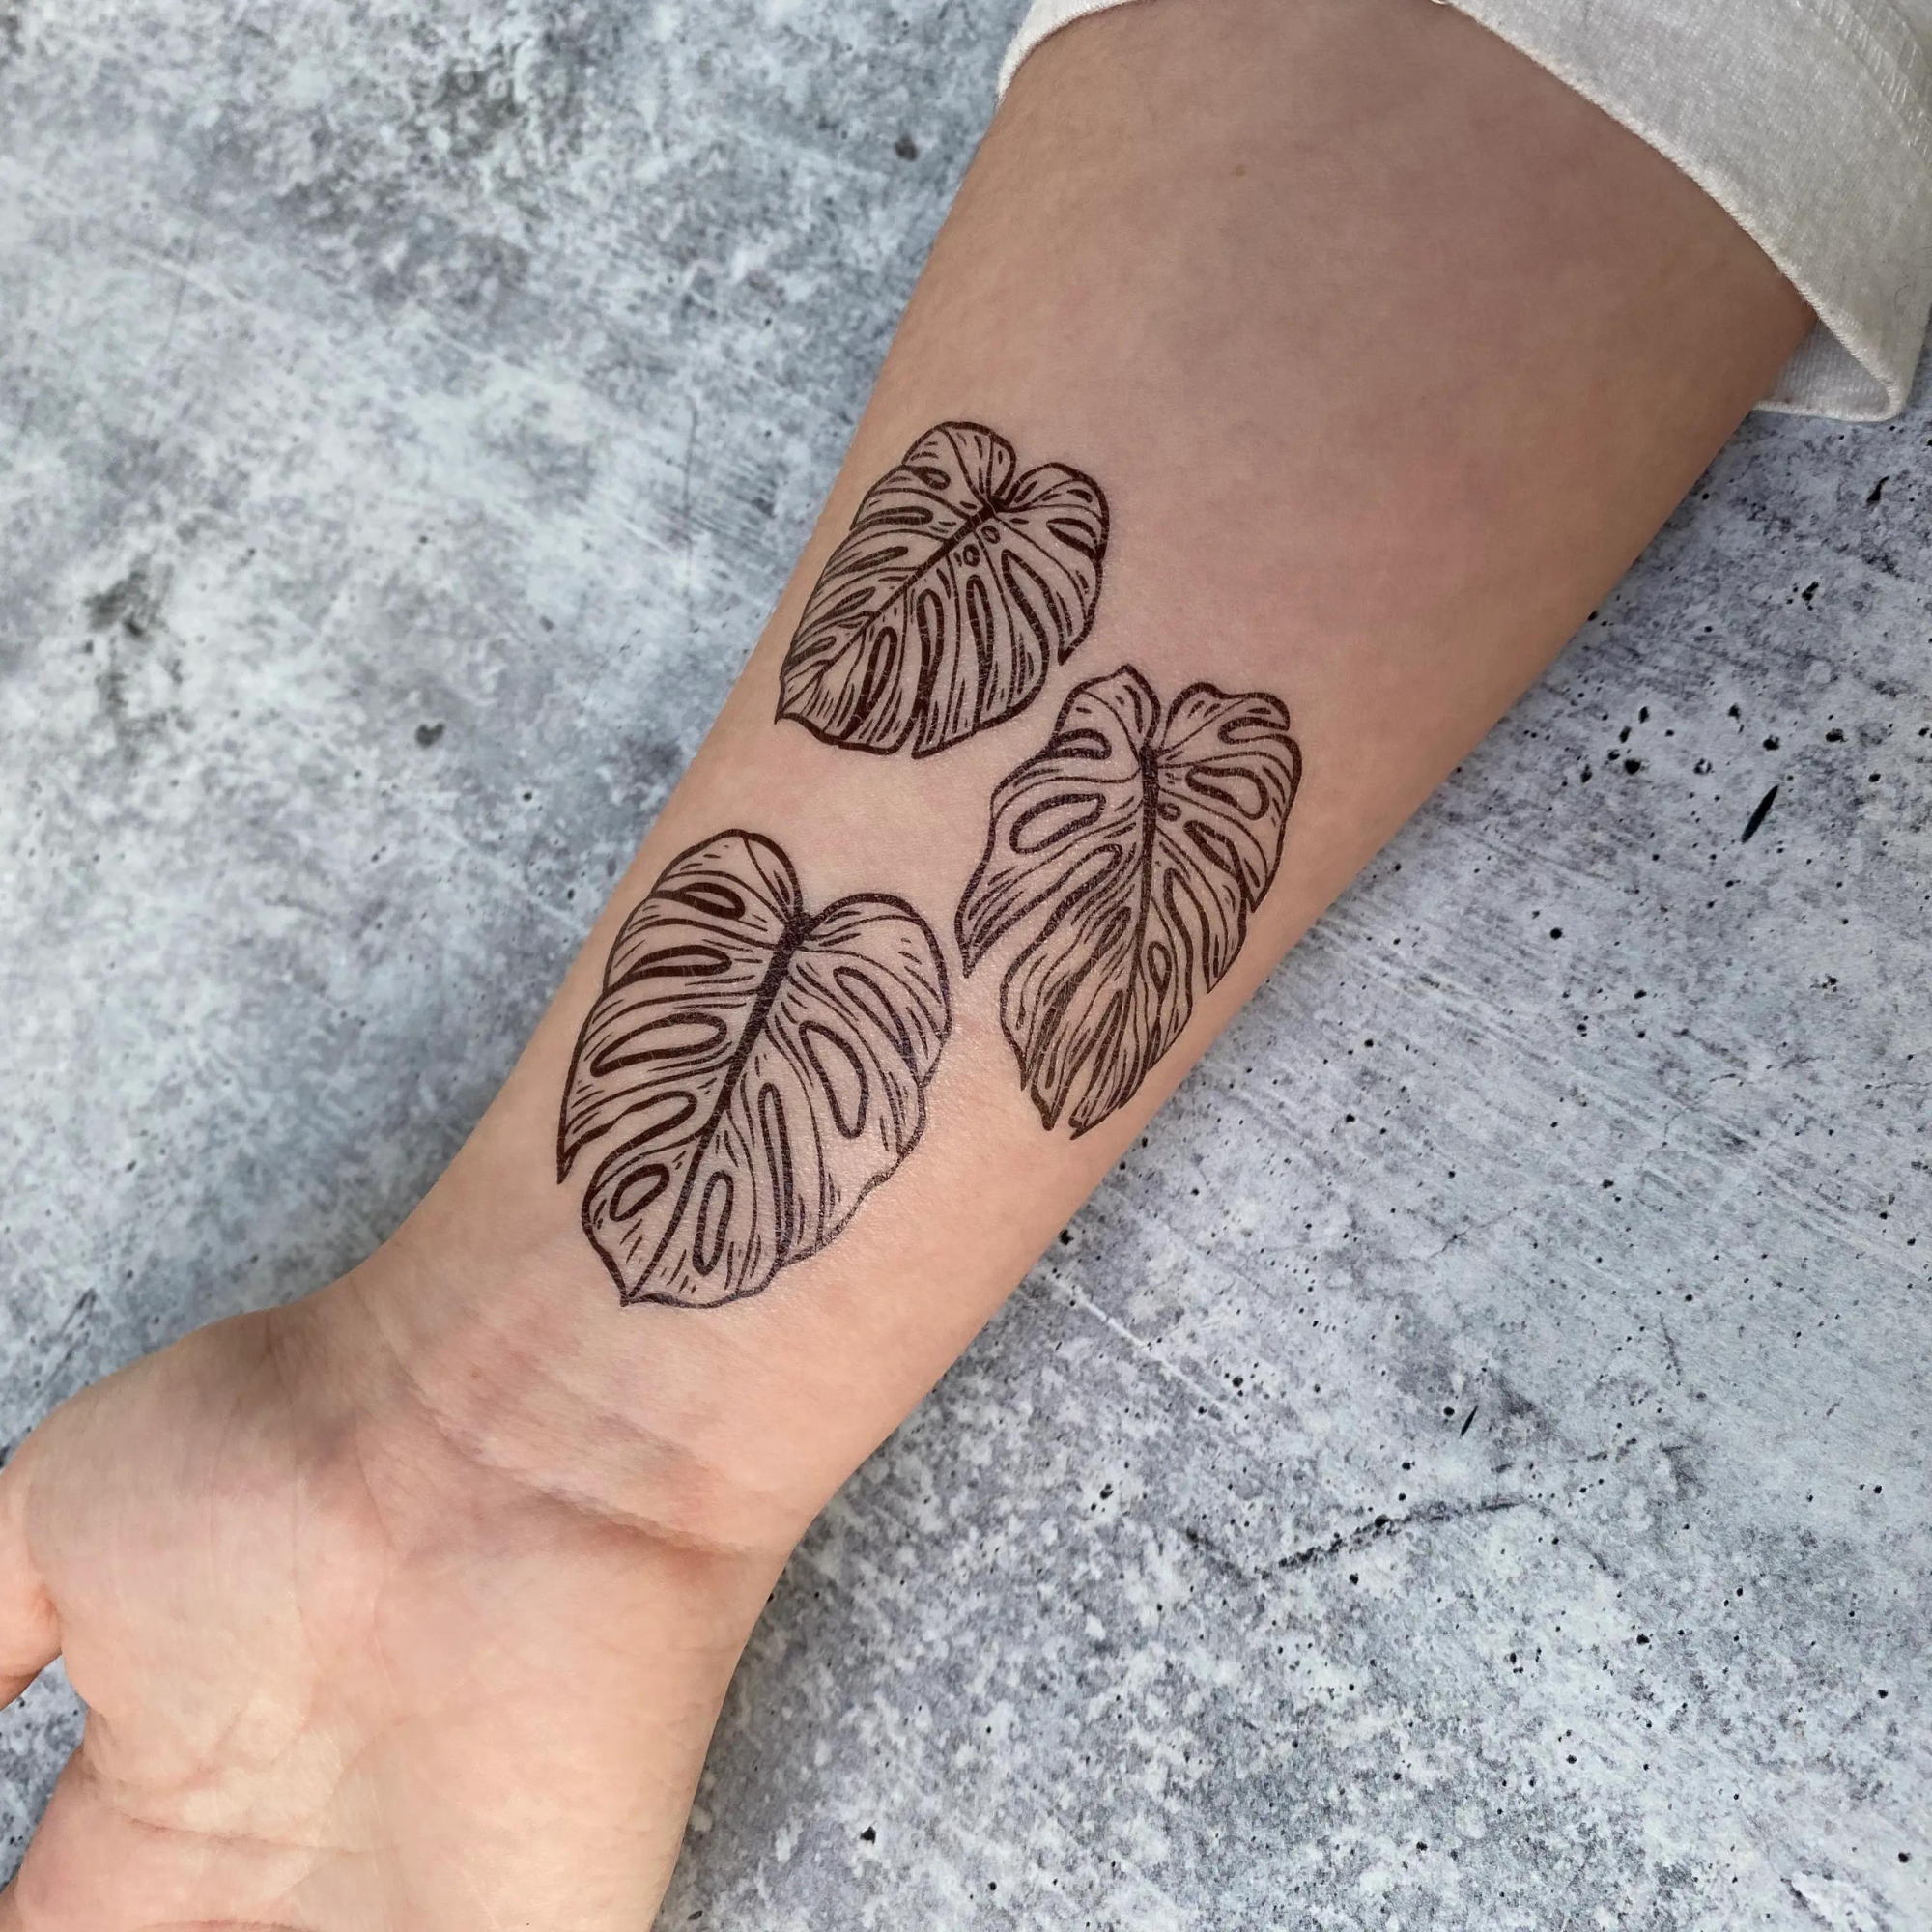 True Monstera Semi-Permanent Tattoo. Lasts 1-2 weeks. Painless and easy to  apply. Organic ink. Browse more or create your own. | Inkbox™ |  Semi-Permanent Tattoos